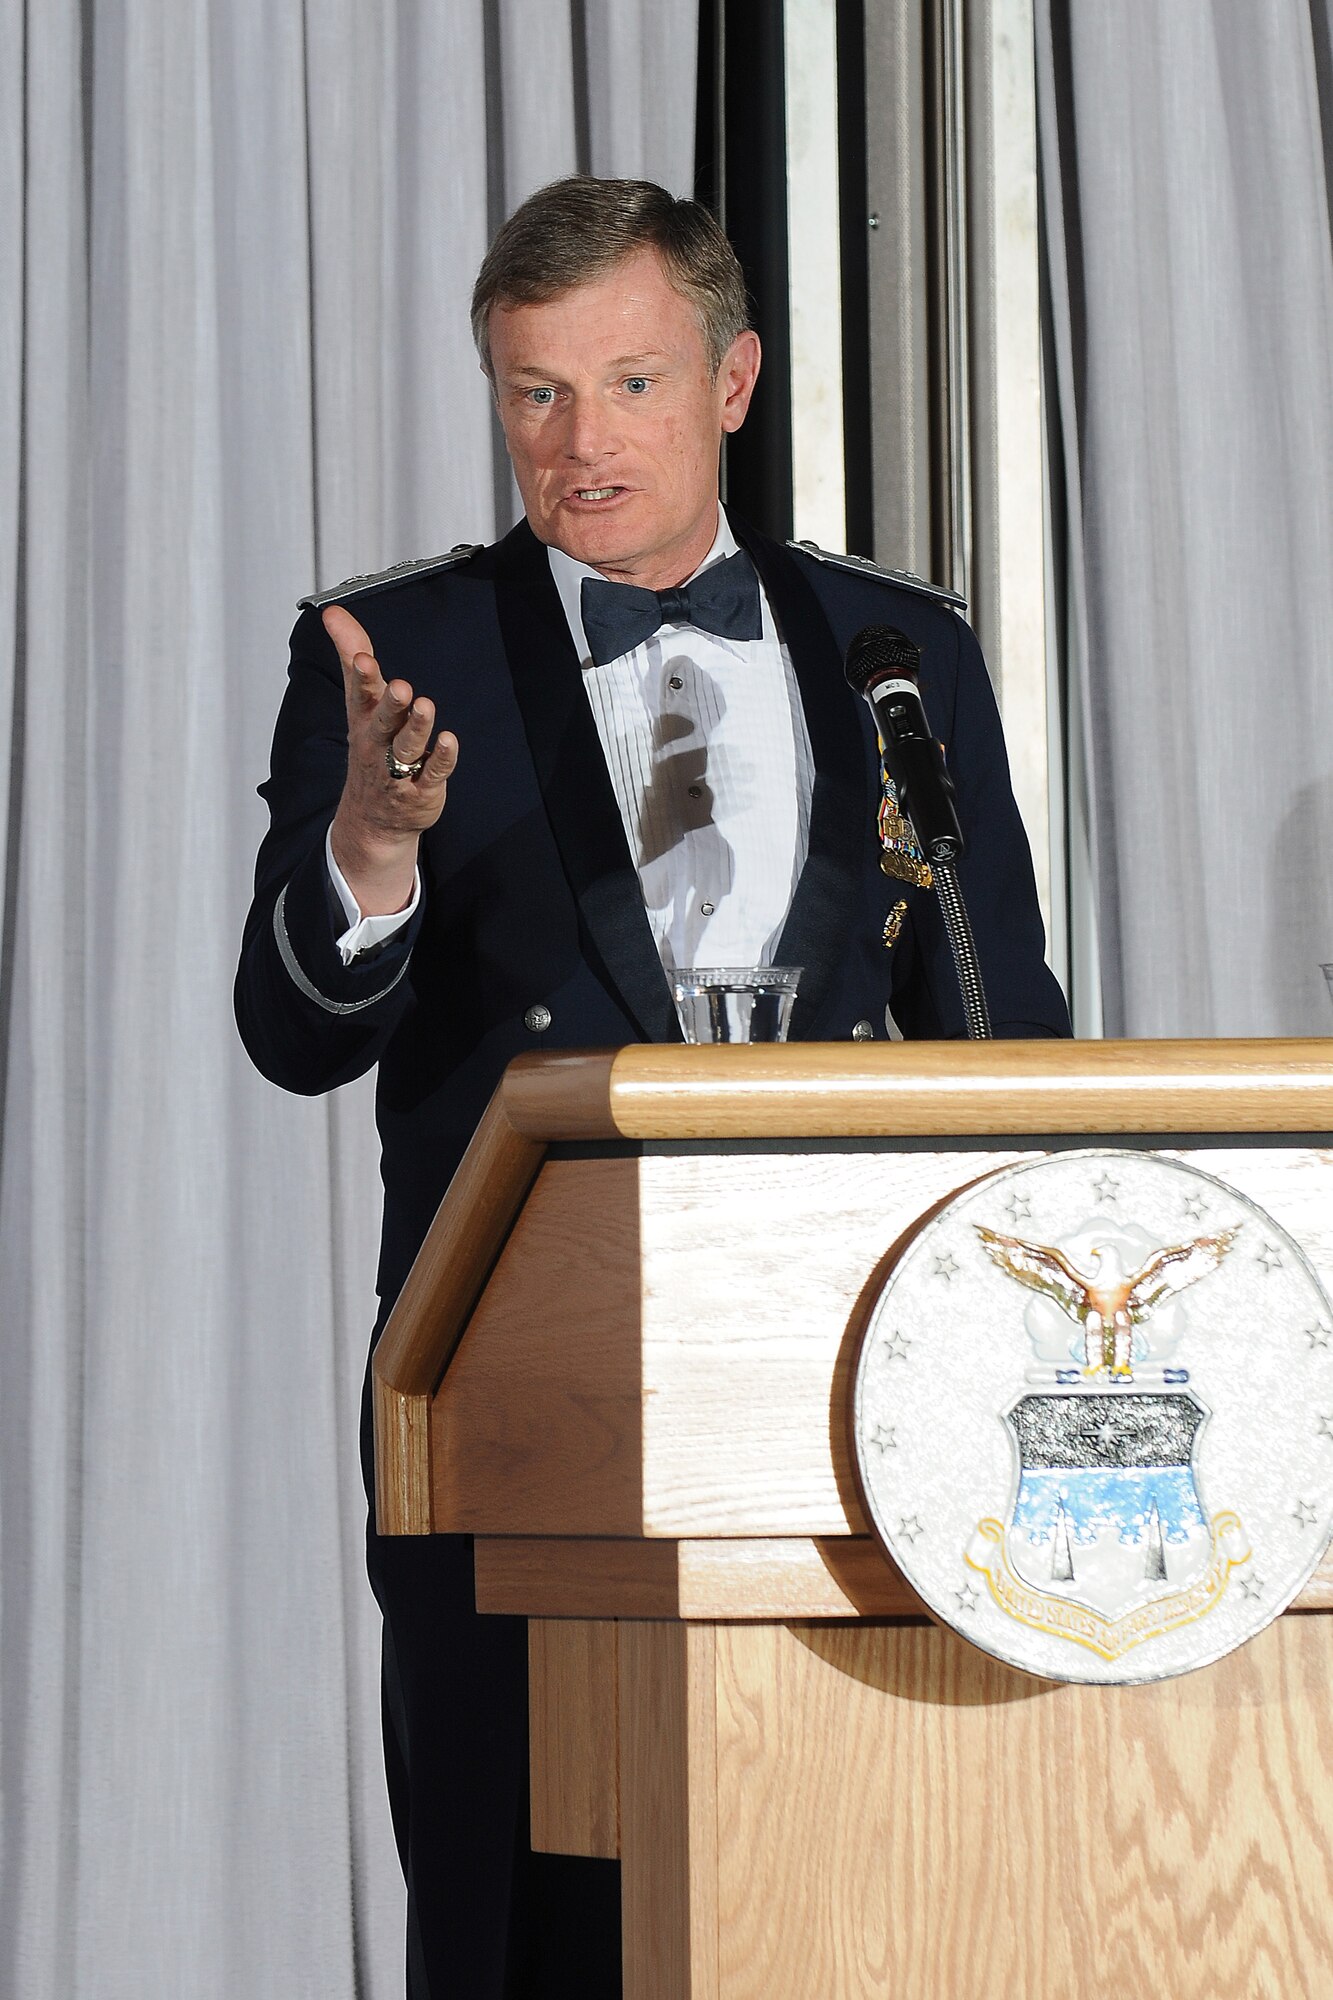 Retired Maj. Gen. Irving Halter Jr. speaks at the Air Force Academy Annual Awards Banquet March 6, 2010. General Halter was the Academy's vice superintendent from June 2005 to September 2006. (U.S. Air Force photo/Rachel Boettcher)